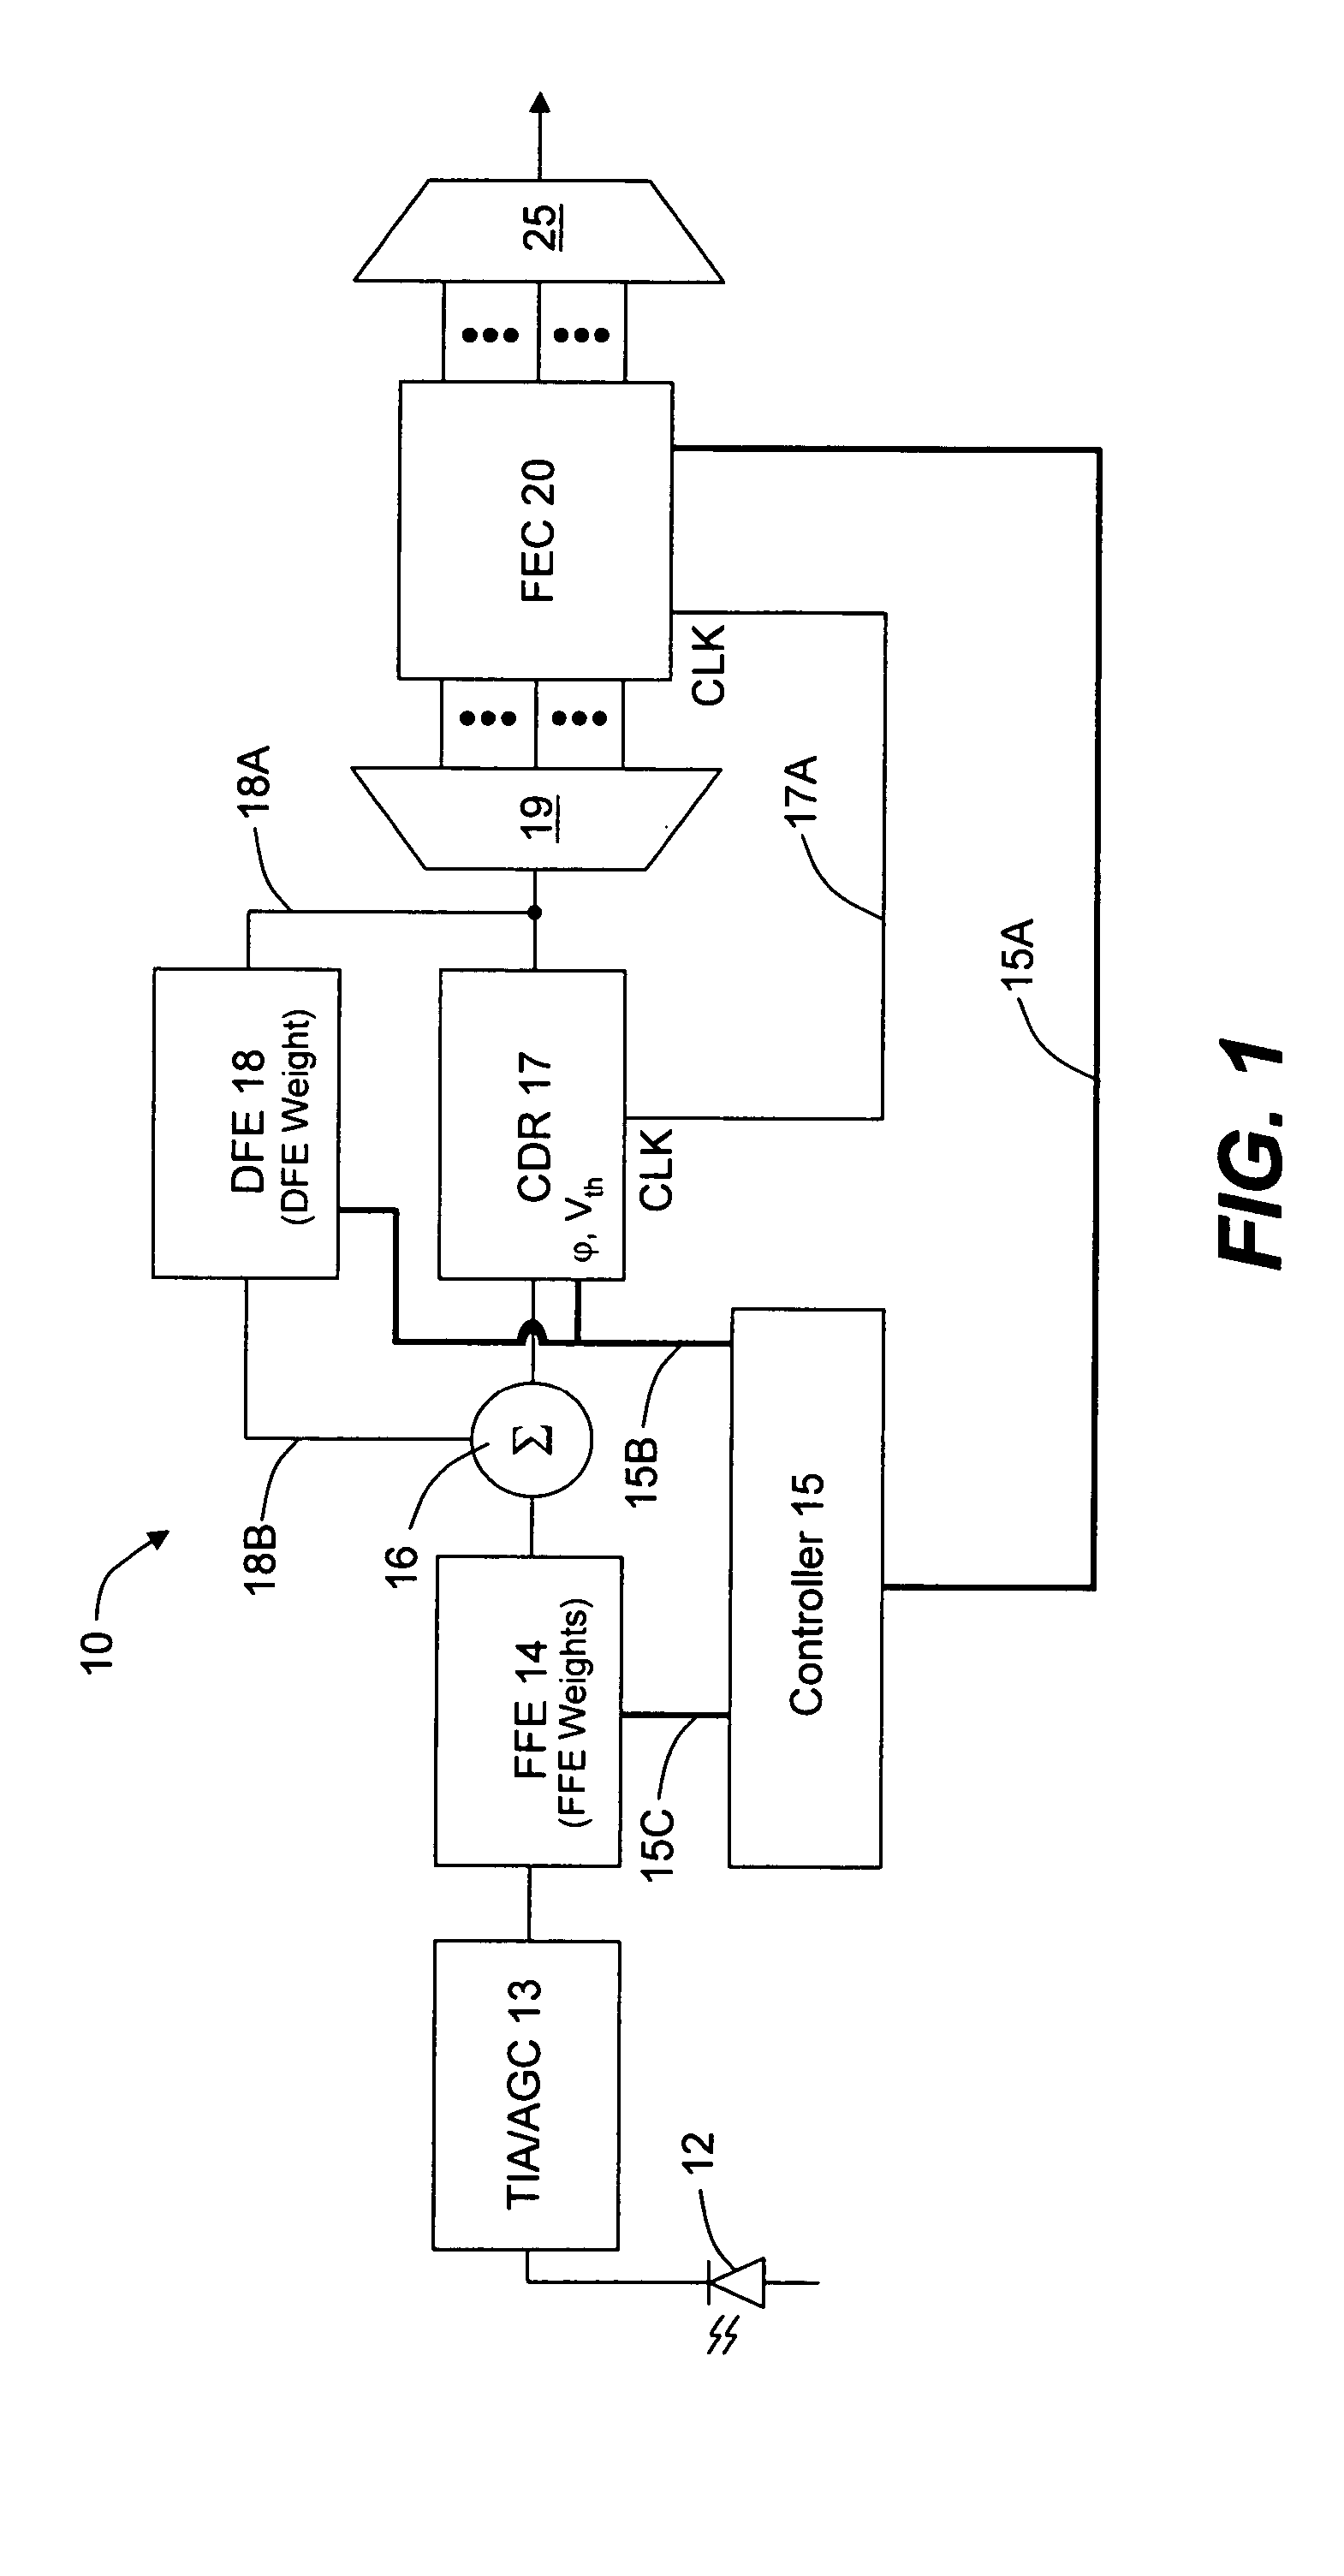 Transmission line with low dispersive properties and its application in equalization